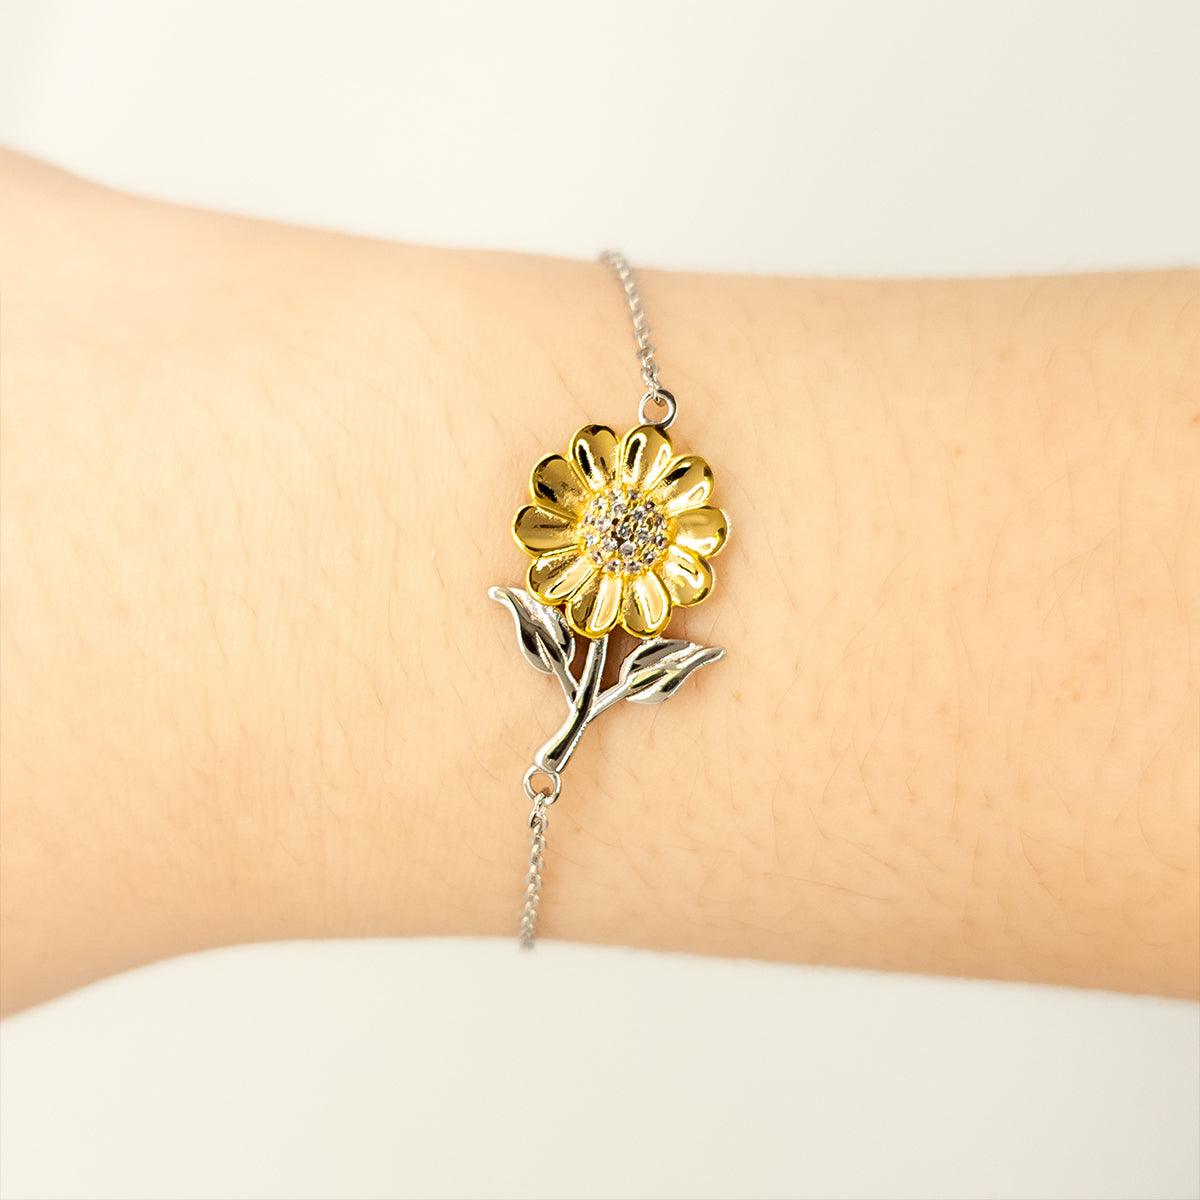 Bonus Son Gifts, To My Bonus Son Remember, you will never lose. You will either WIN or LEARN, Keepsake Sunflower Bracelet For Bonus Son Card, Birthday Christmas Gifts Ideas For Bonus Son X-mas Gifts - Mallard Moon Gift Shop